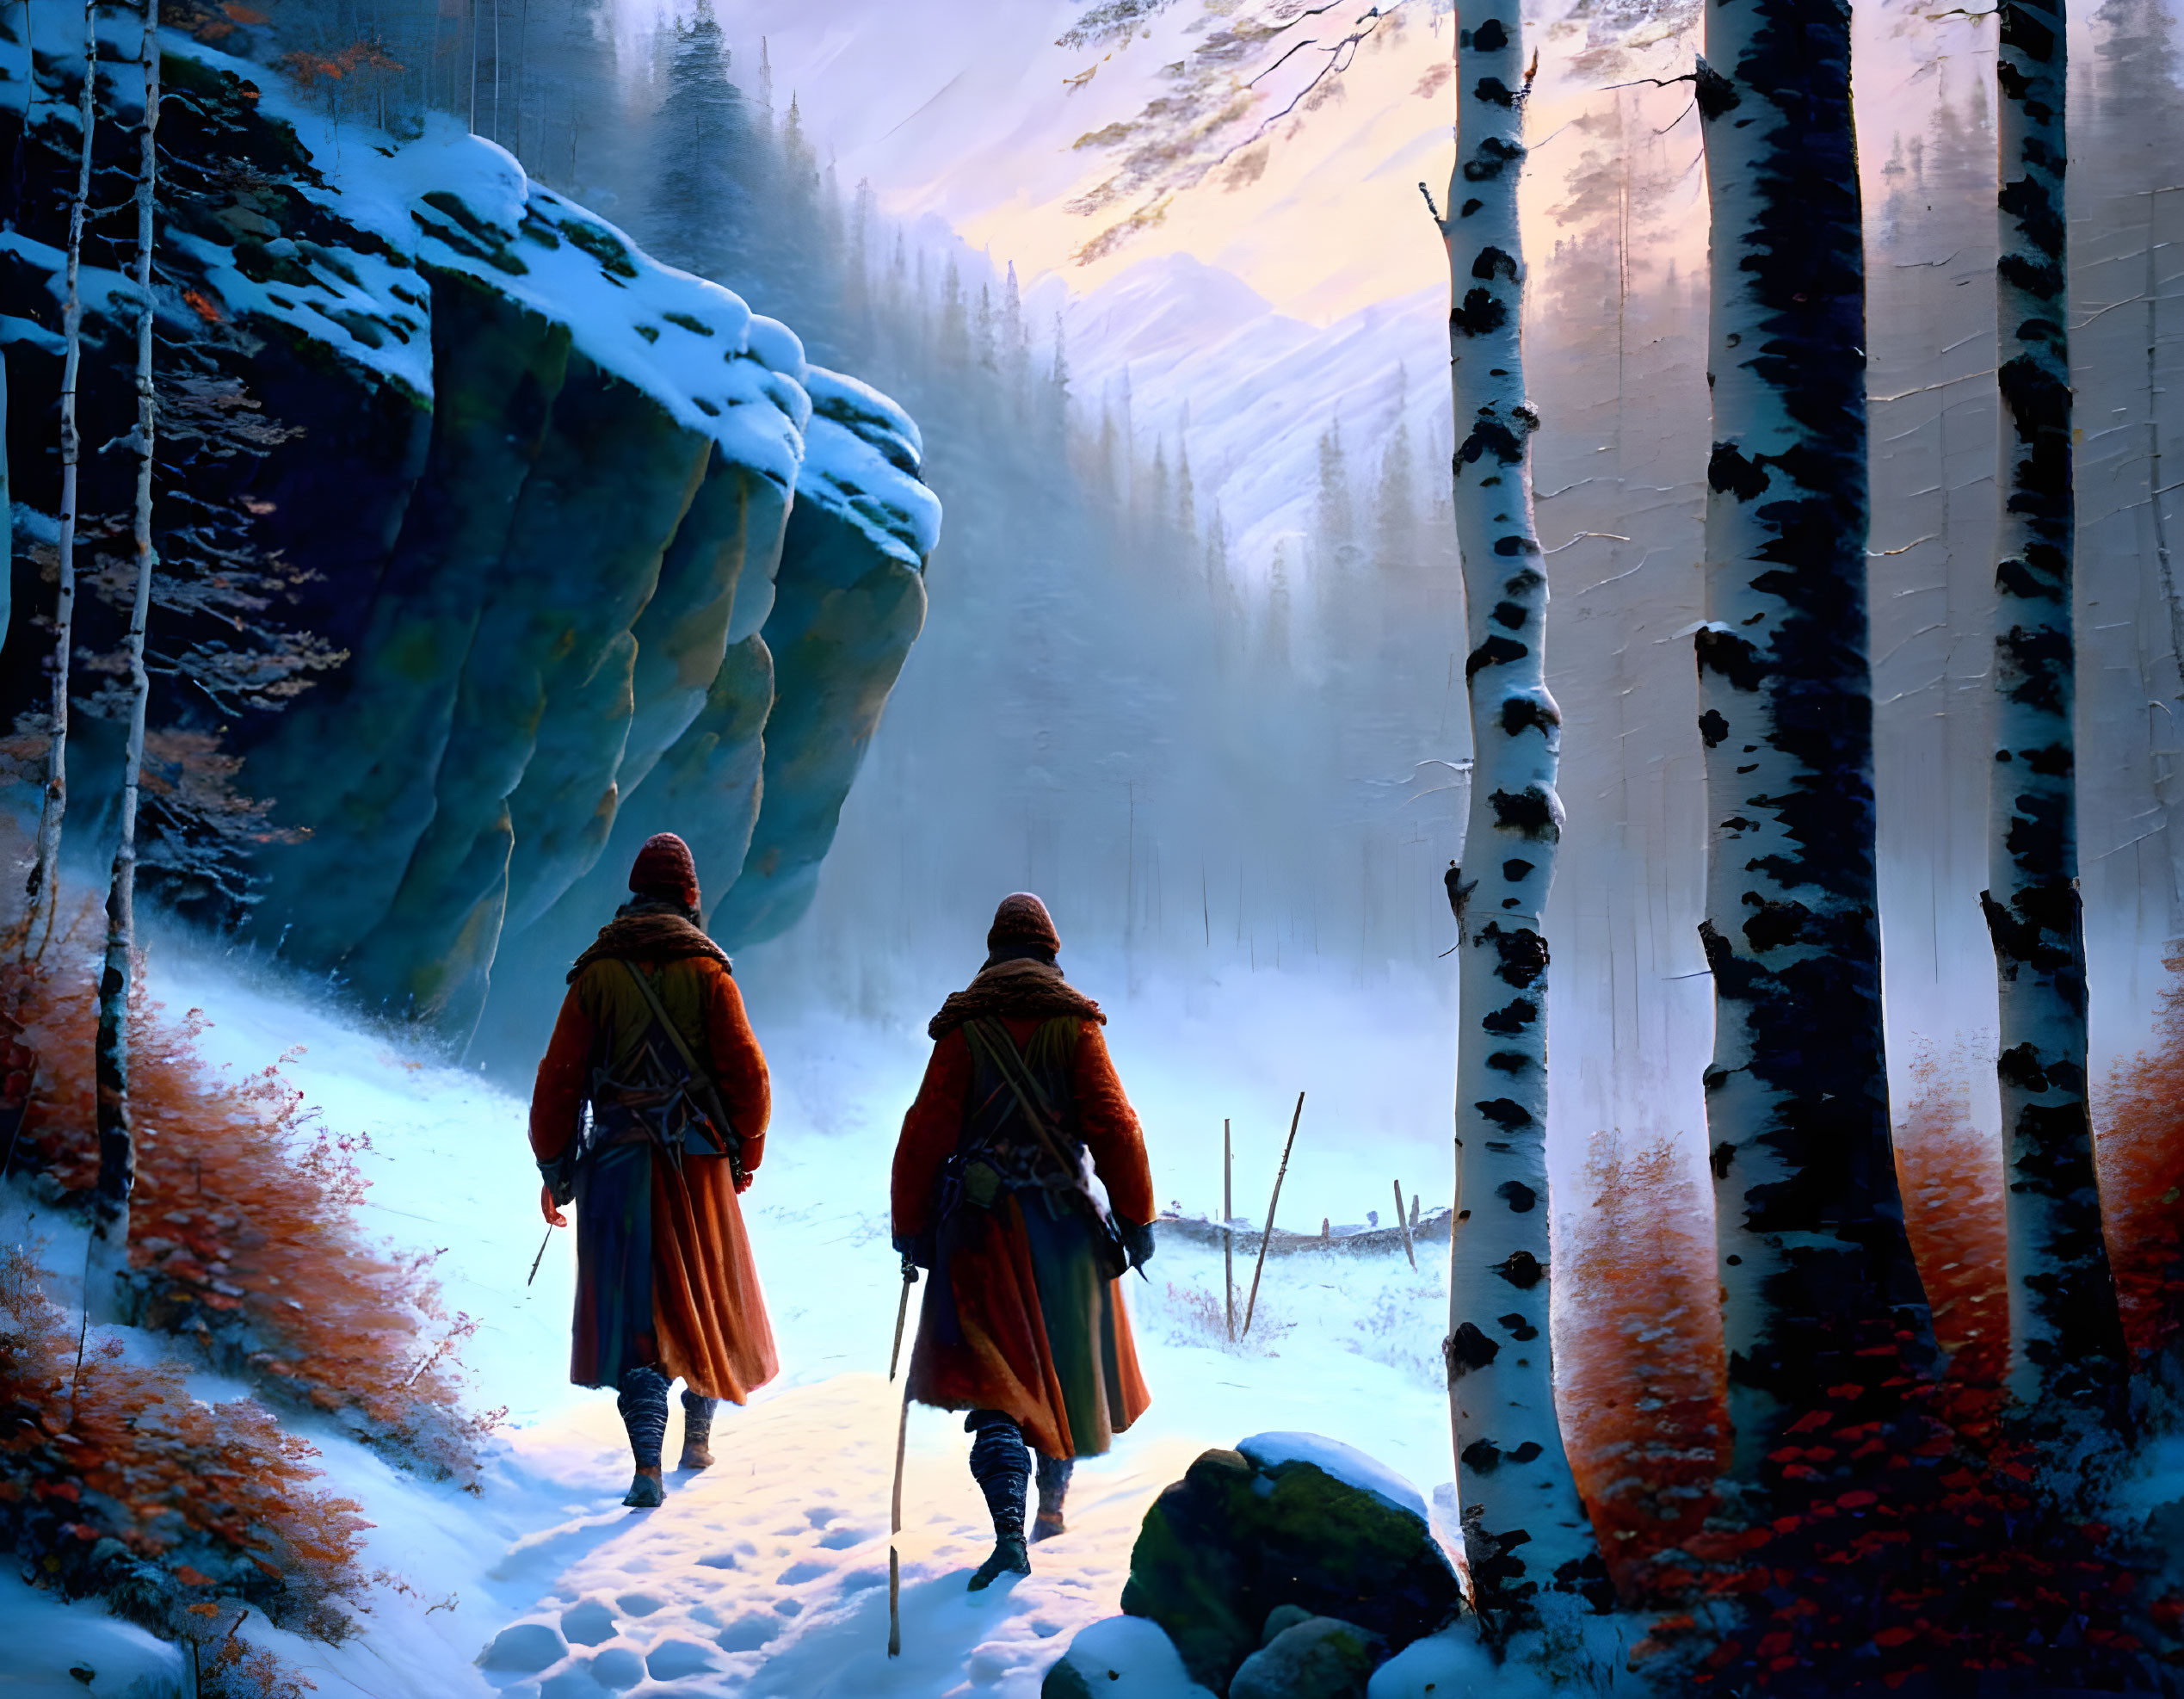  Winter time,oil painting of two adventurers